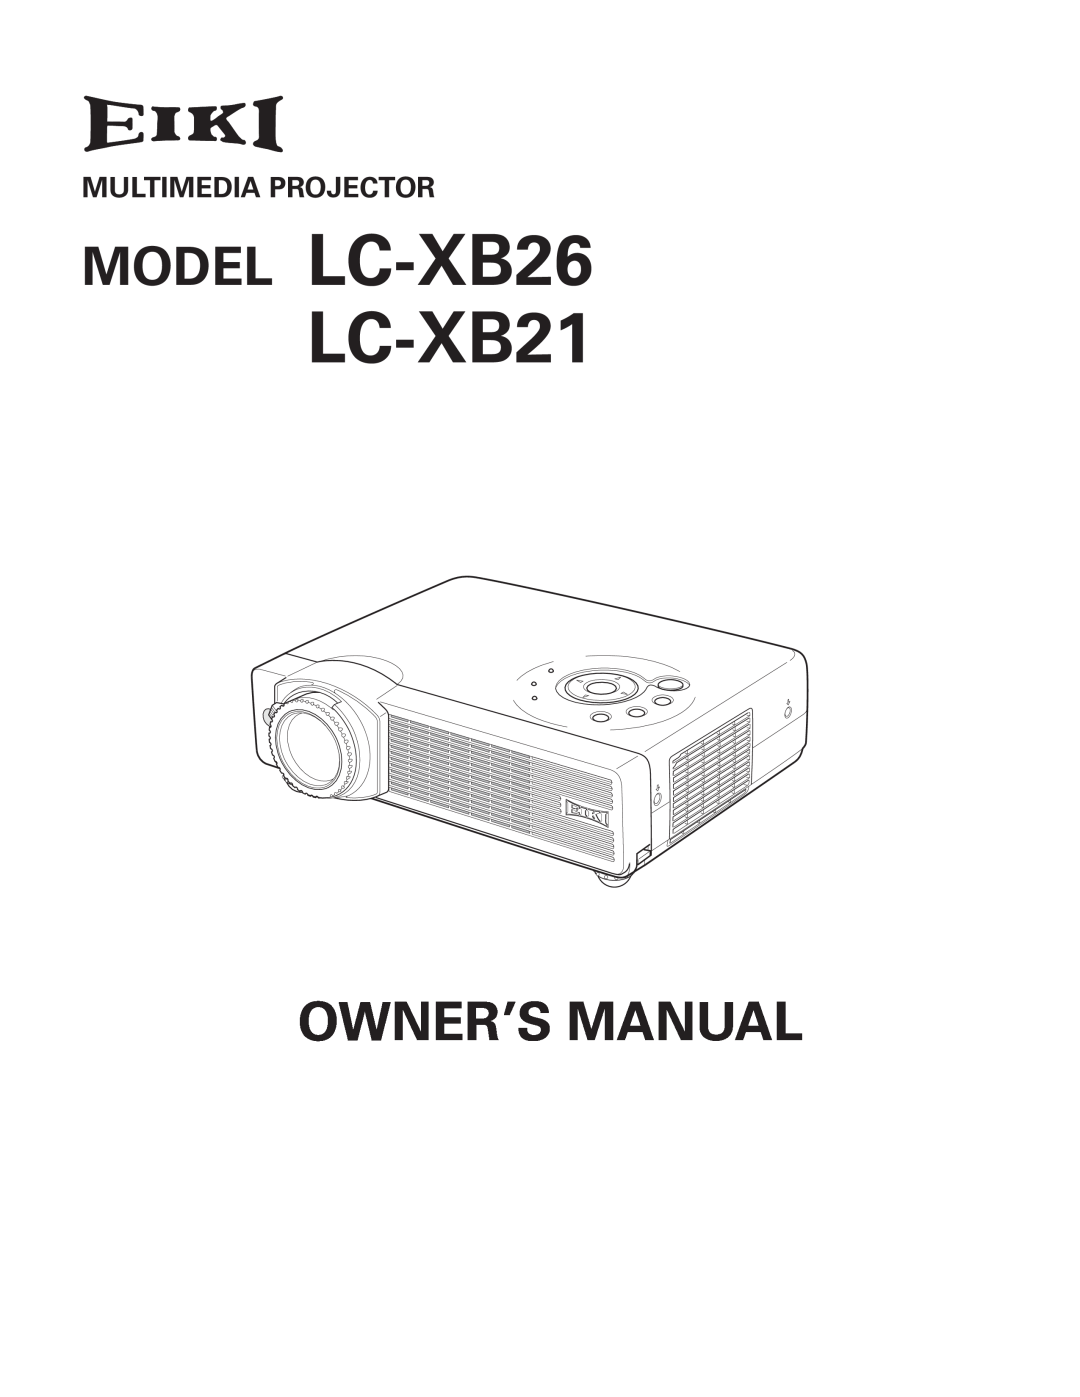 Eiki owner manual Multimedia Projector, MODEL LC-XB26 LC-XB21, Owner’S Manual 